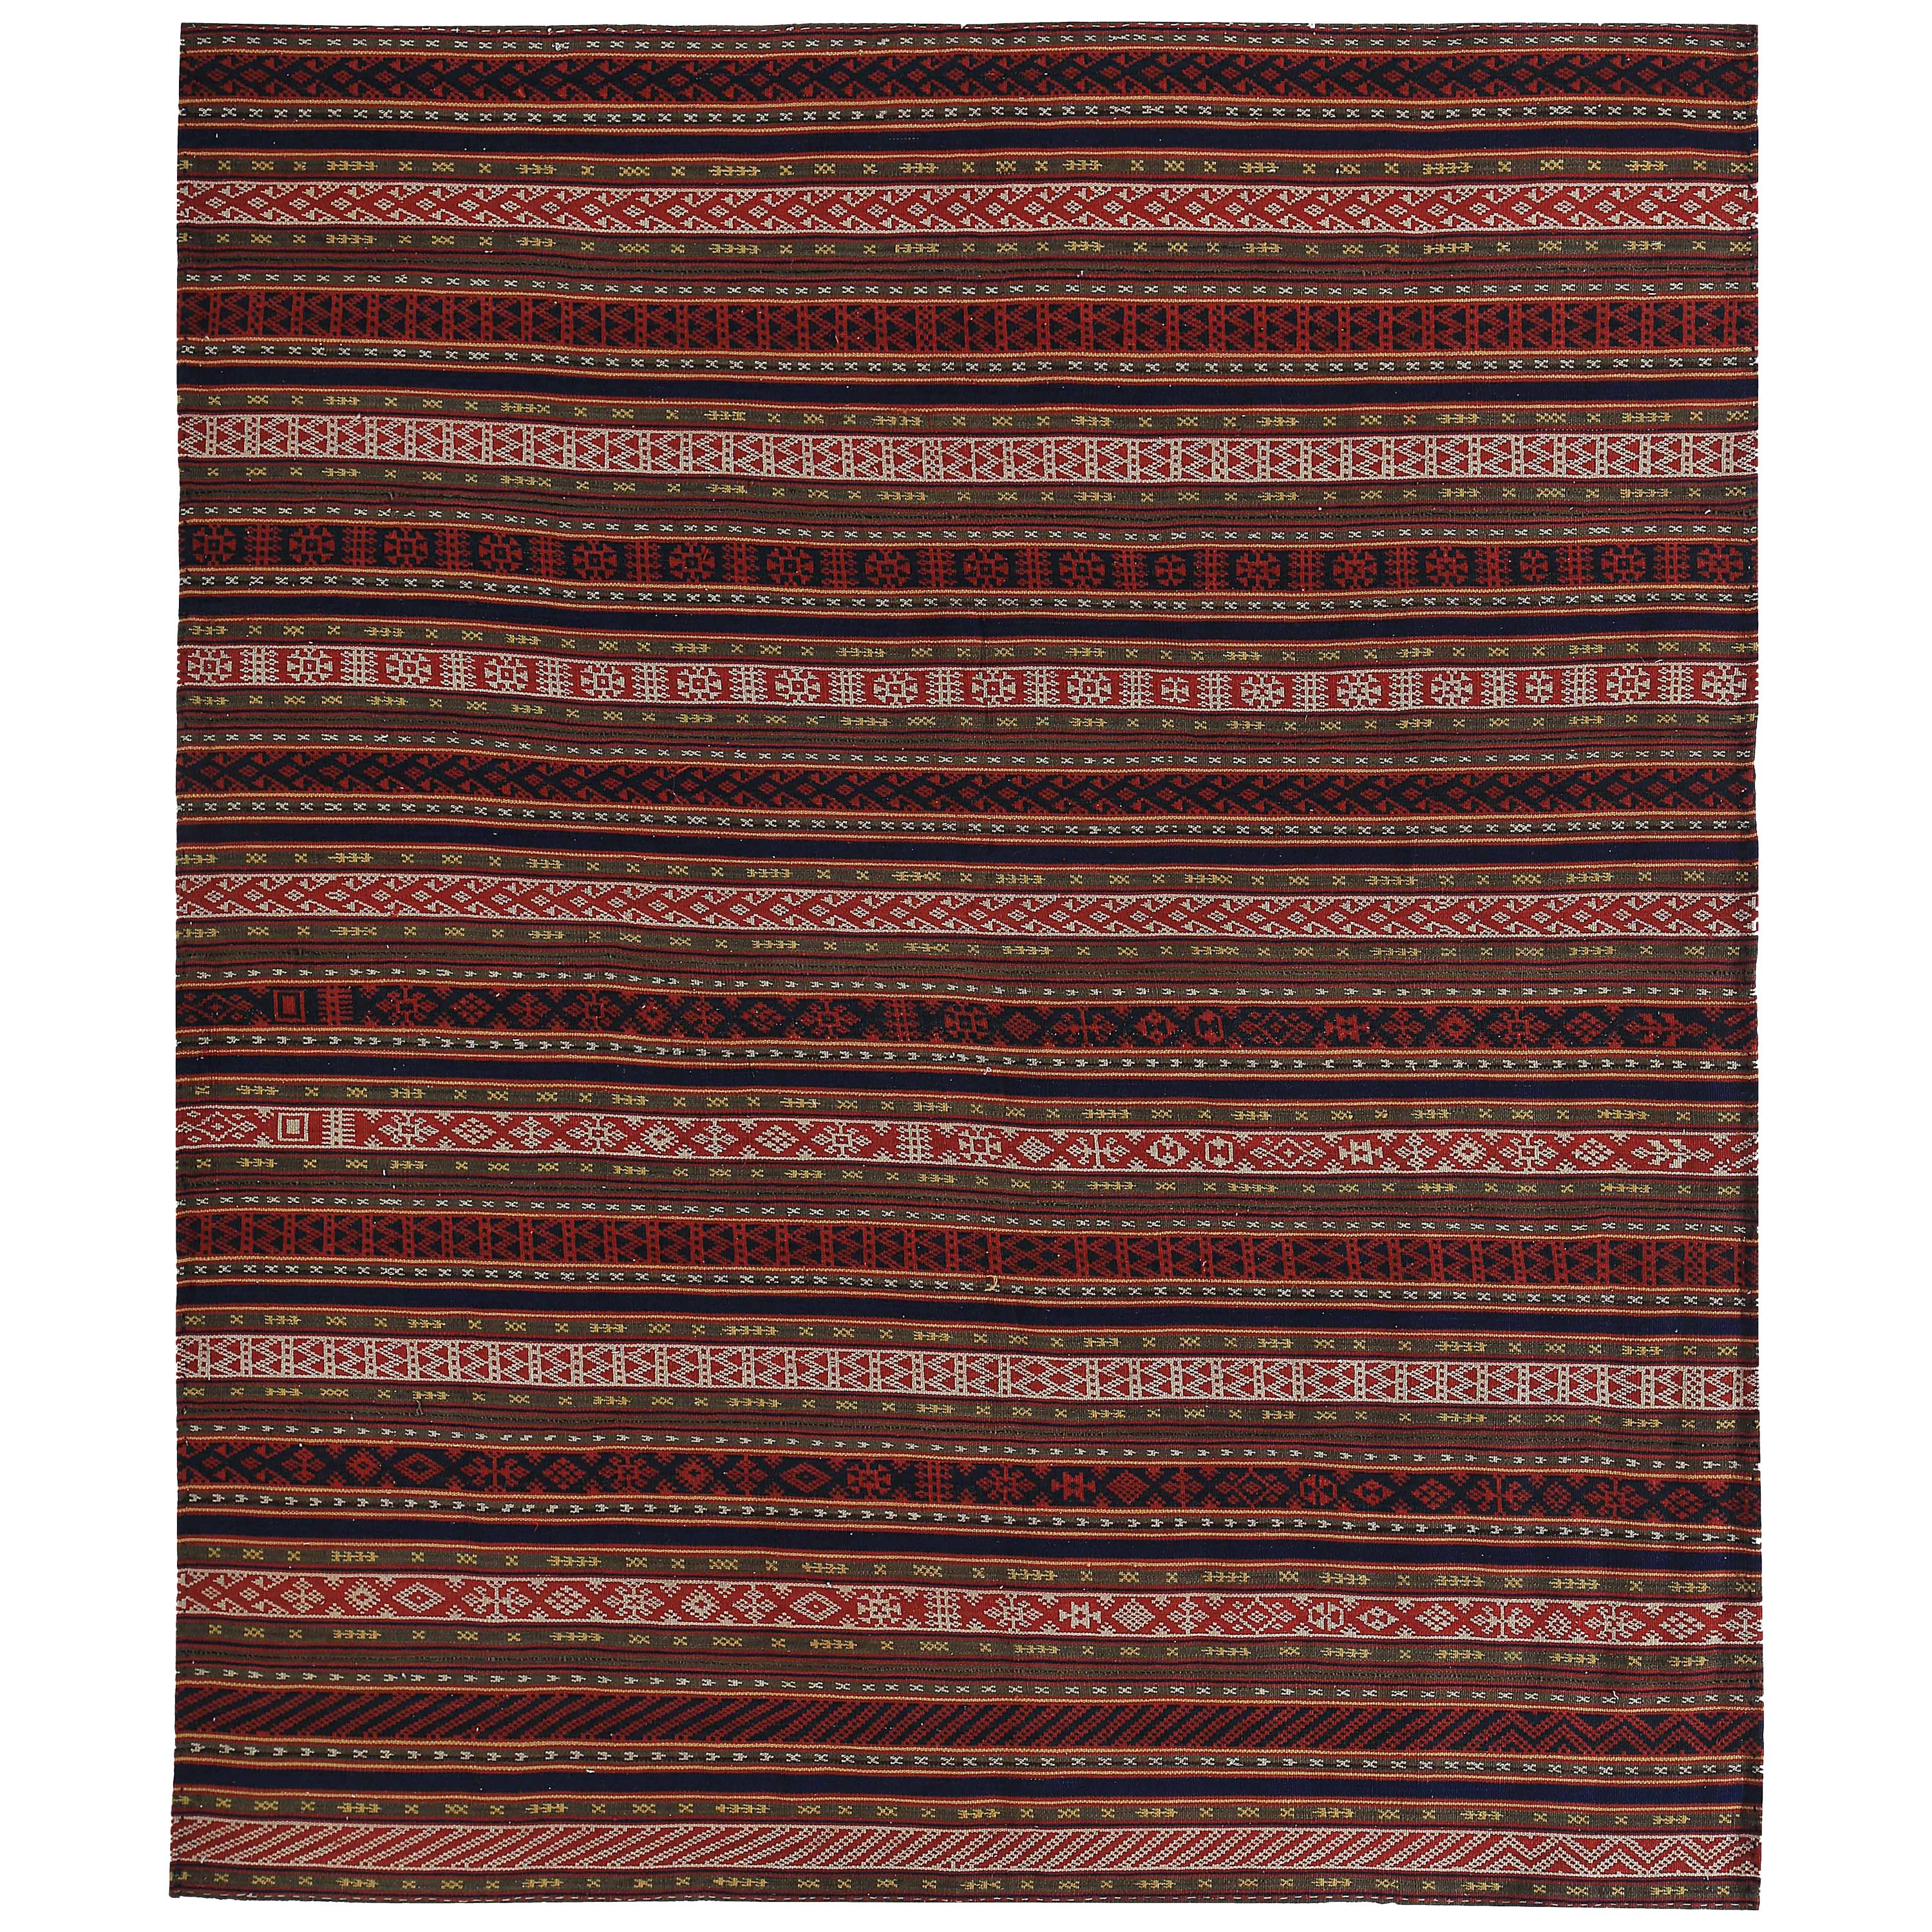 Modern Turkish Kilim Rug with Red and White Tribal Details on Striped Field